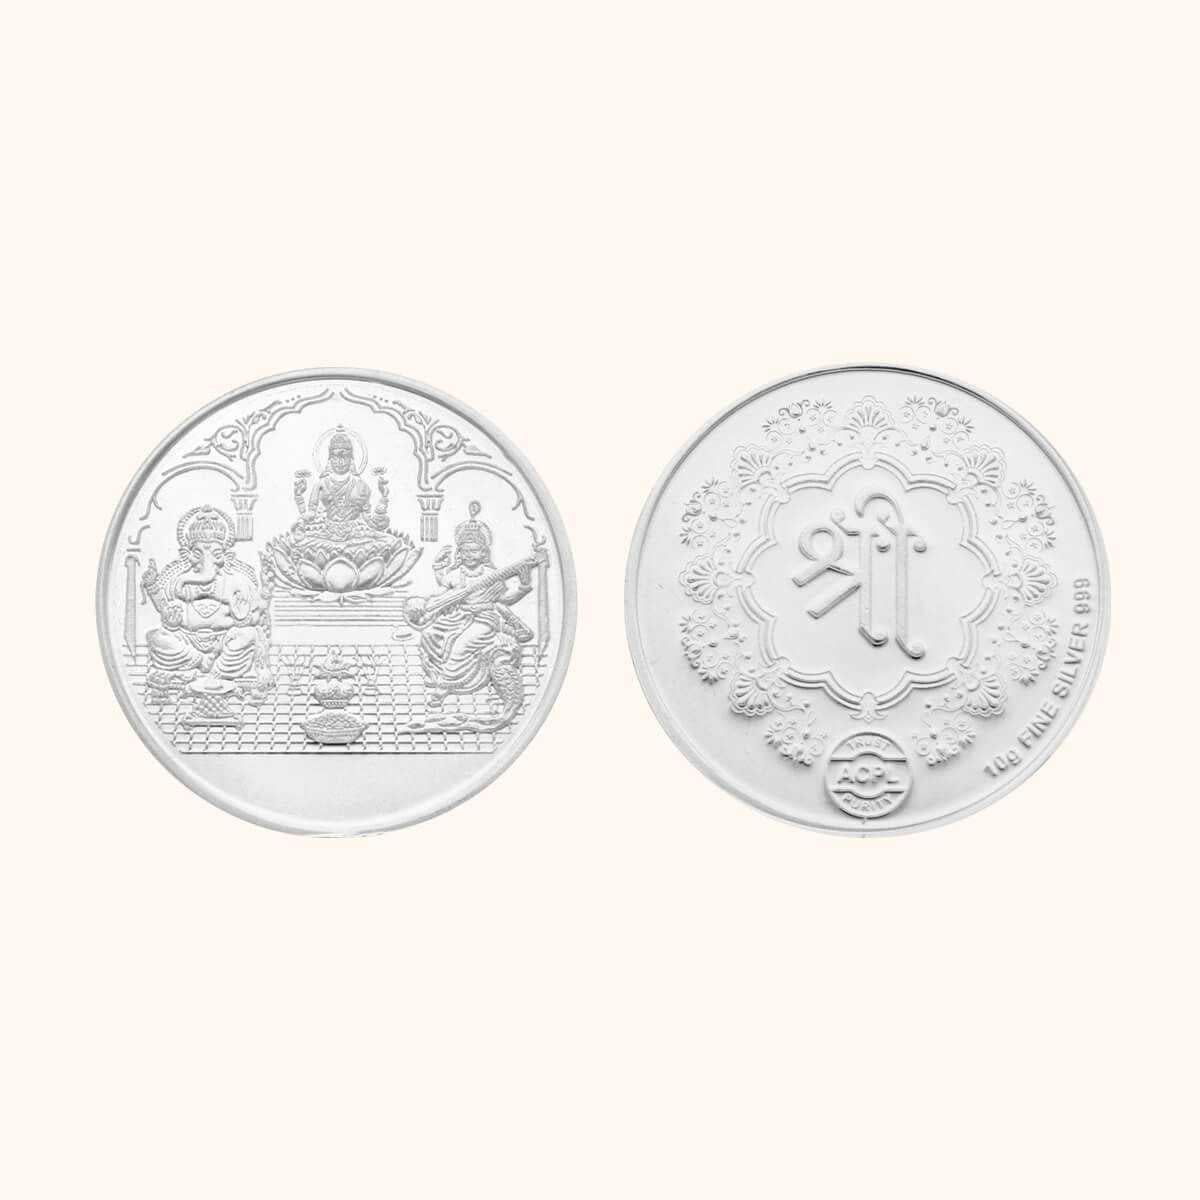 Buy NINE10 German Silver Coins 10 Grams Silver Plated for Diwali Gift Items  for Men/Women/Staff/Customer/Clients/Corporate with Velvet Gift Box (Pack  of 3) Online at Lowest Price Ever in India | Check Reviews